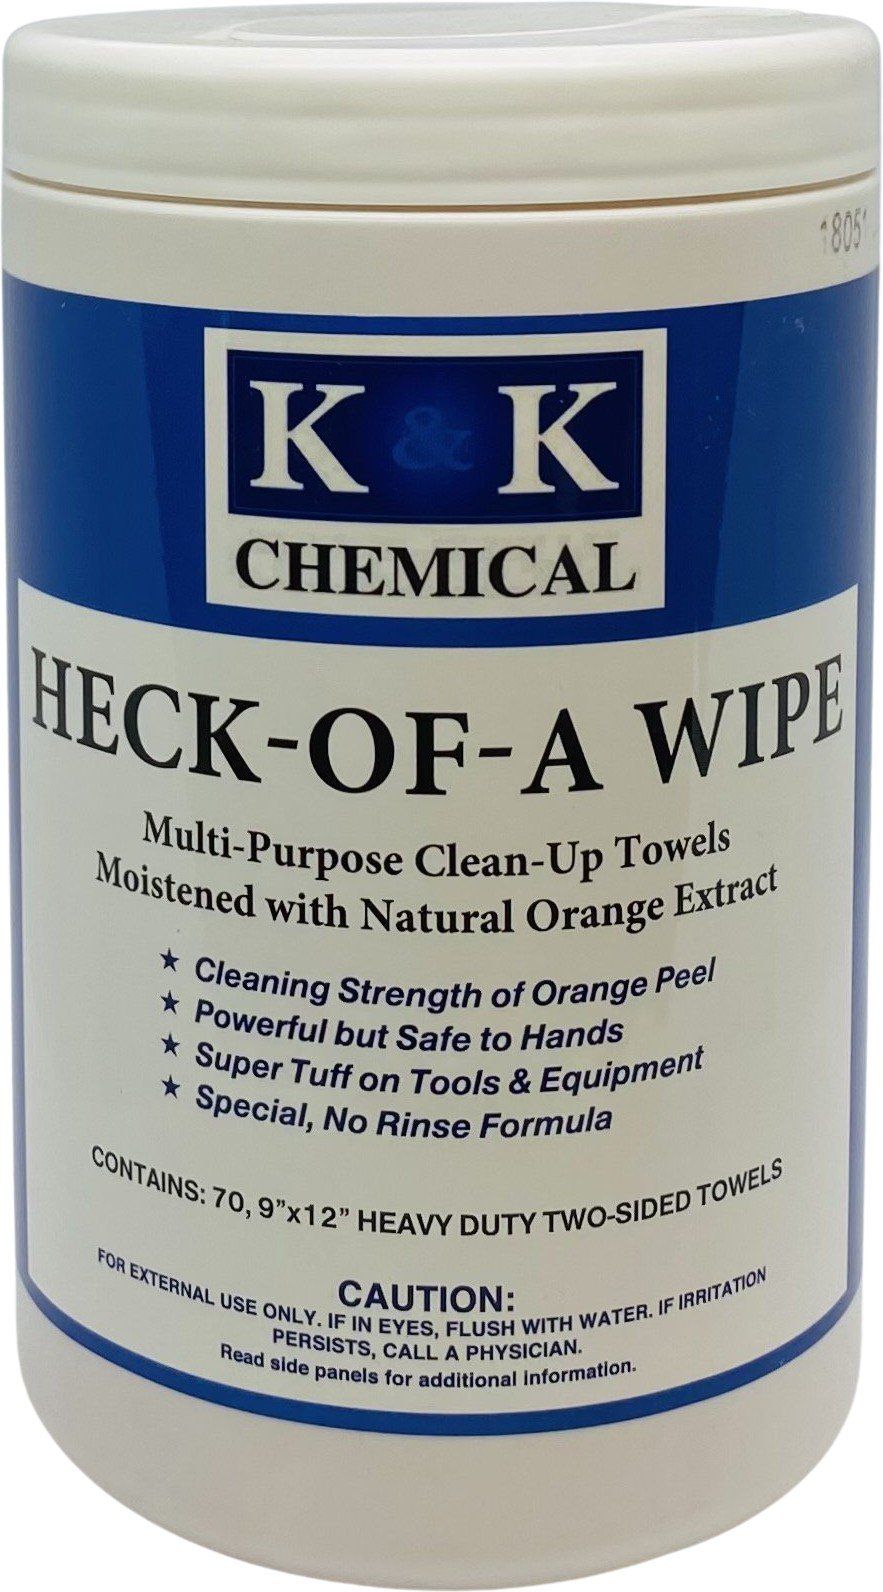 HECK-OF-A-WIPE | Multi-Purpose Clean-Up Towels